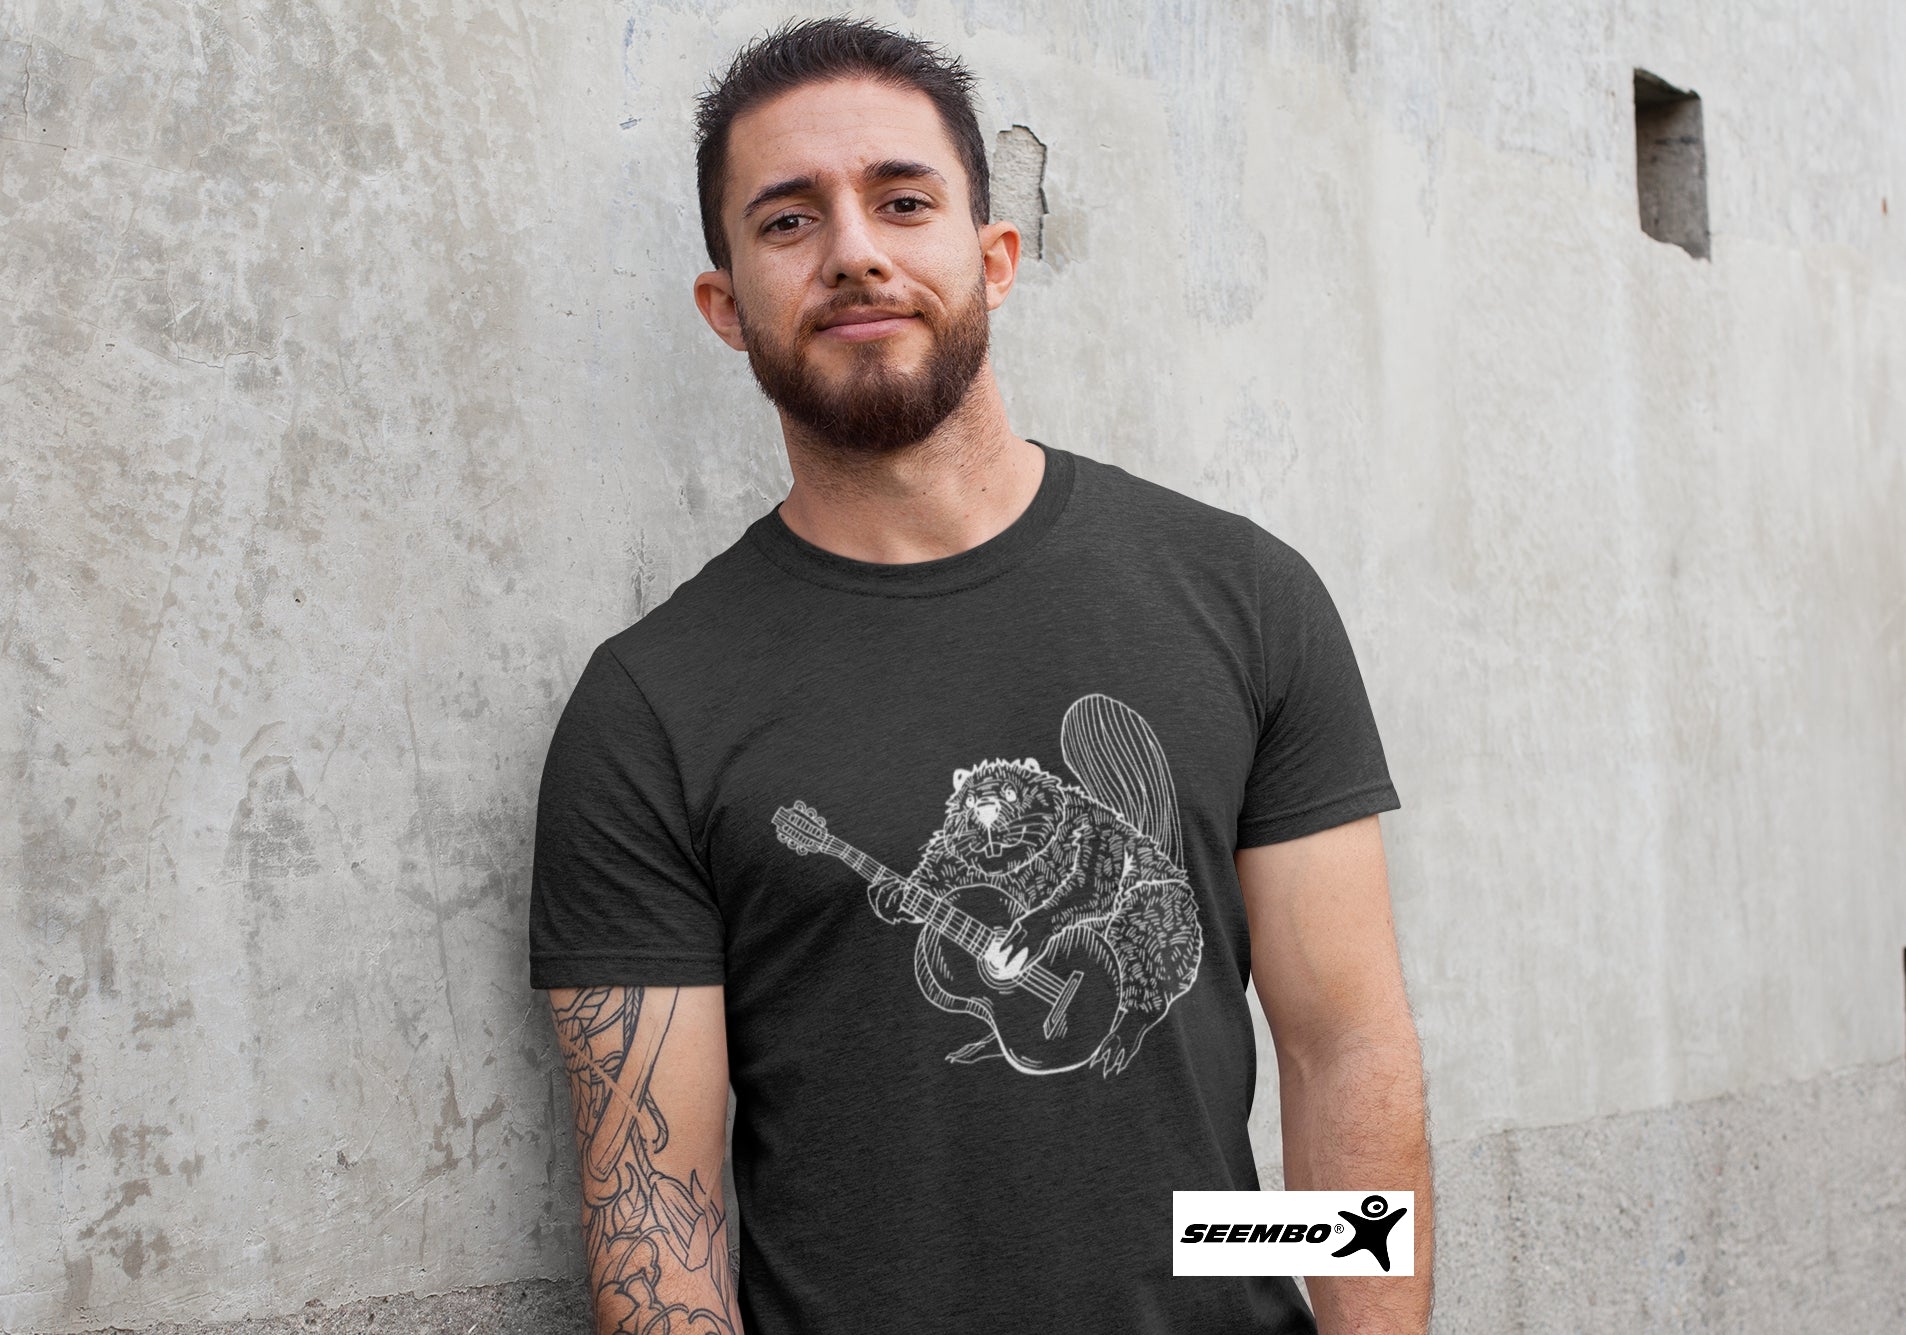 seembo-octopus-lifting-barbells-workout-vintage-black-t-shirt-fitness-man-pointing-at-the-camera-ipe204